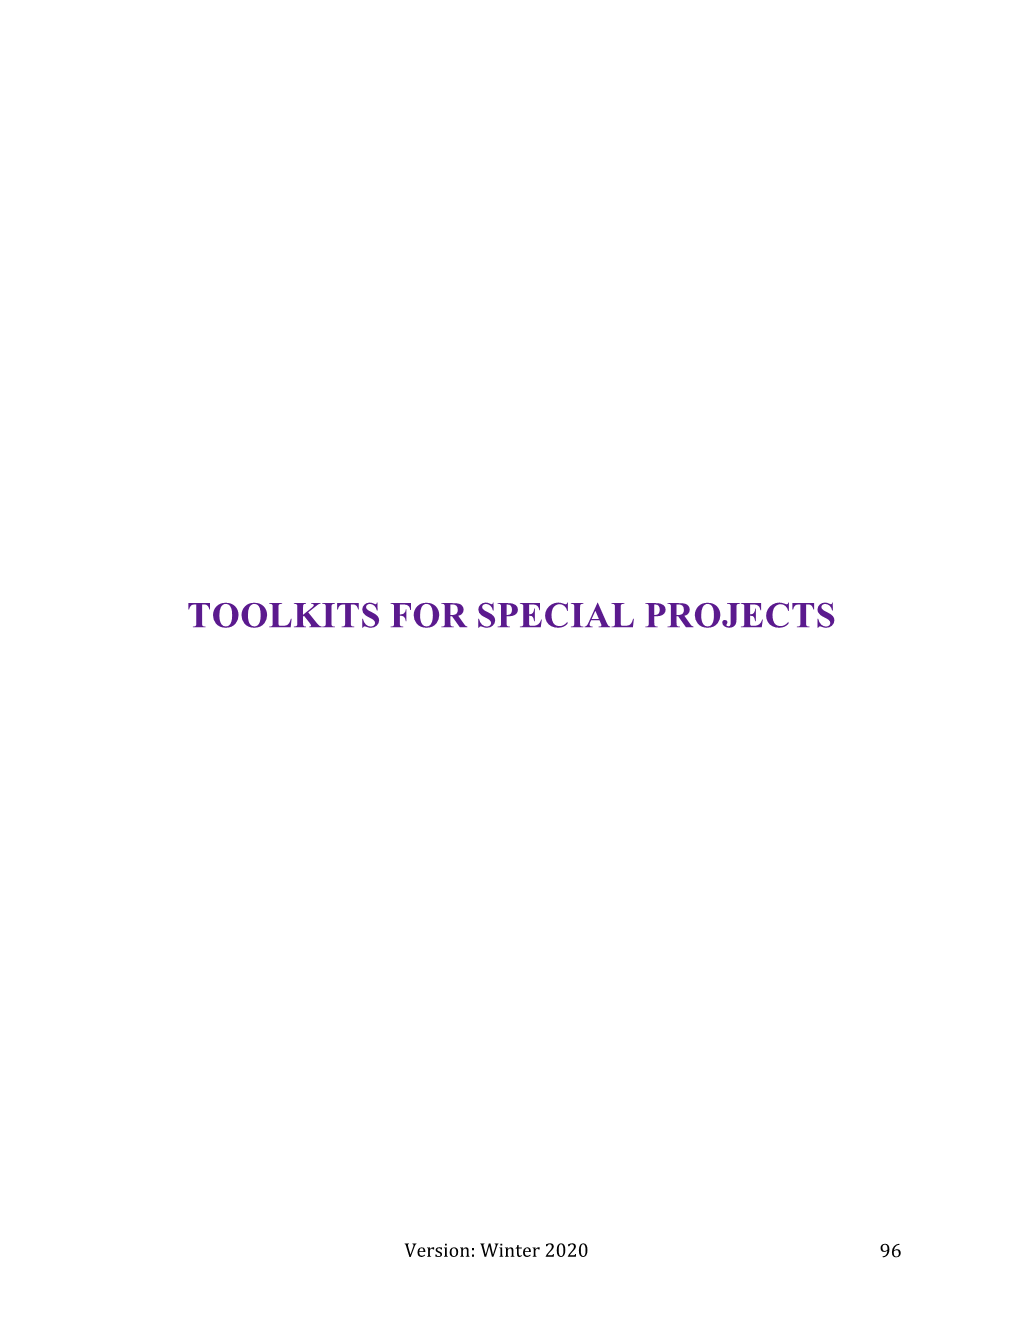 Toolkits for Special Projects